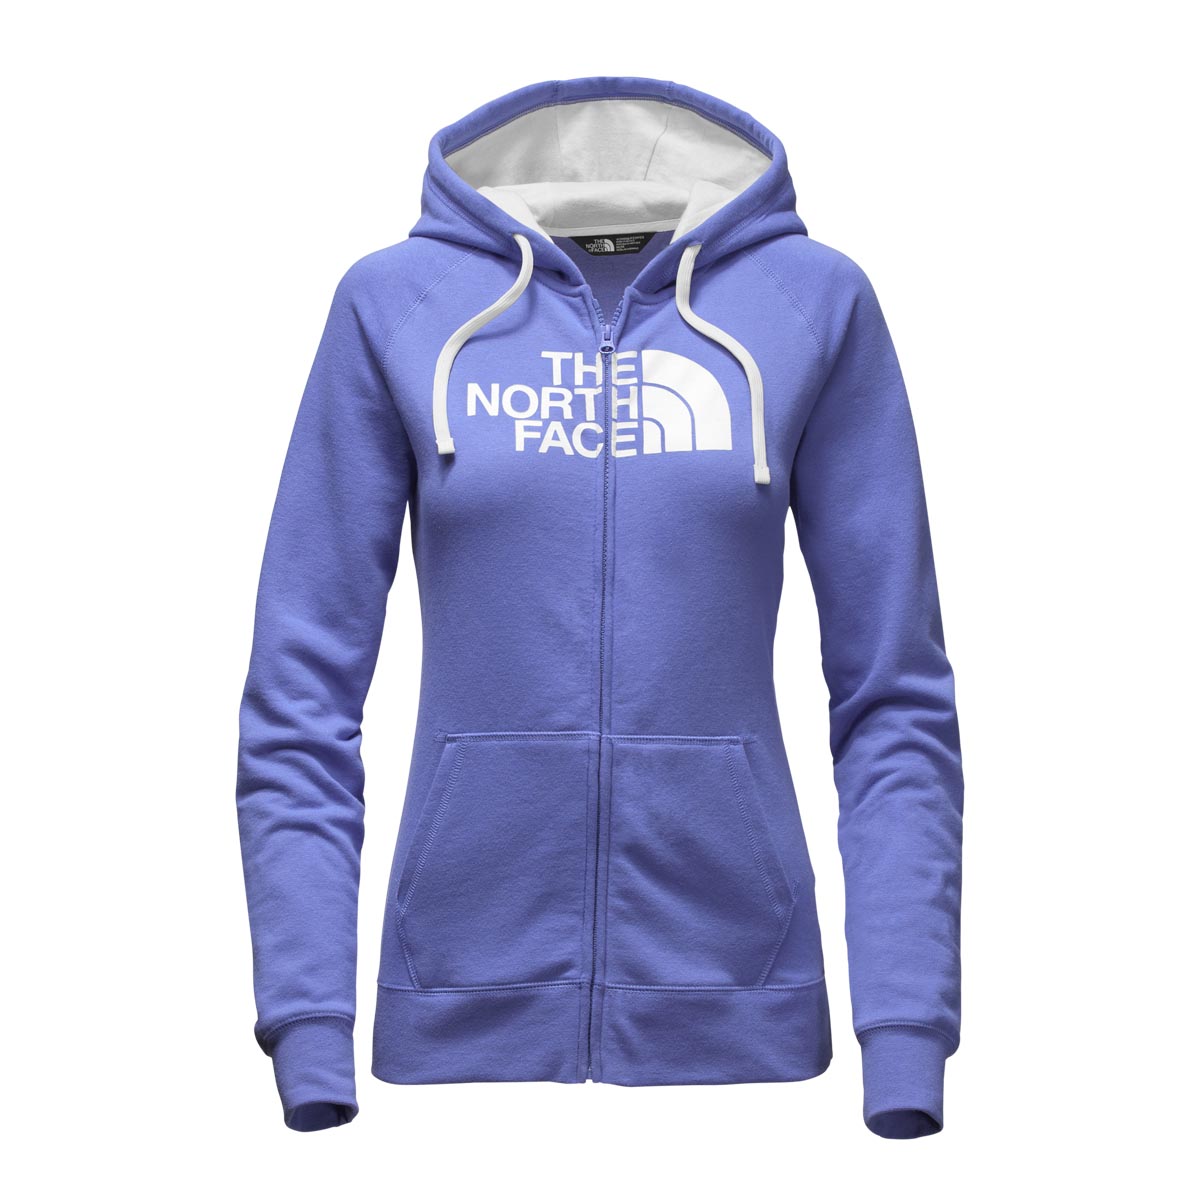 The North Face Womens Half Dome Full Zip Hoodie Discontinued Pricing